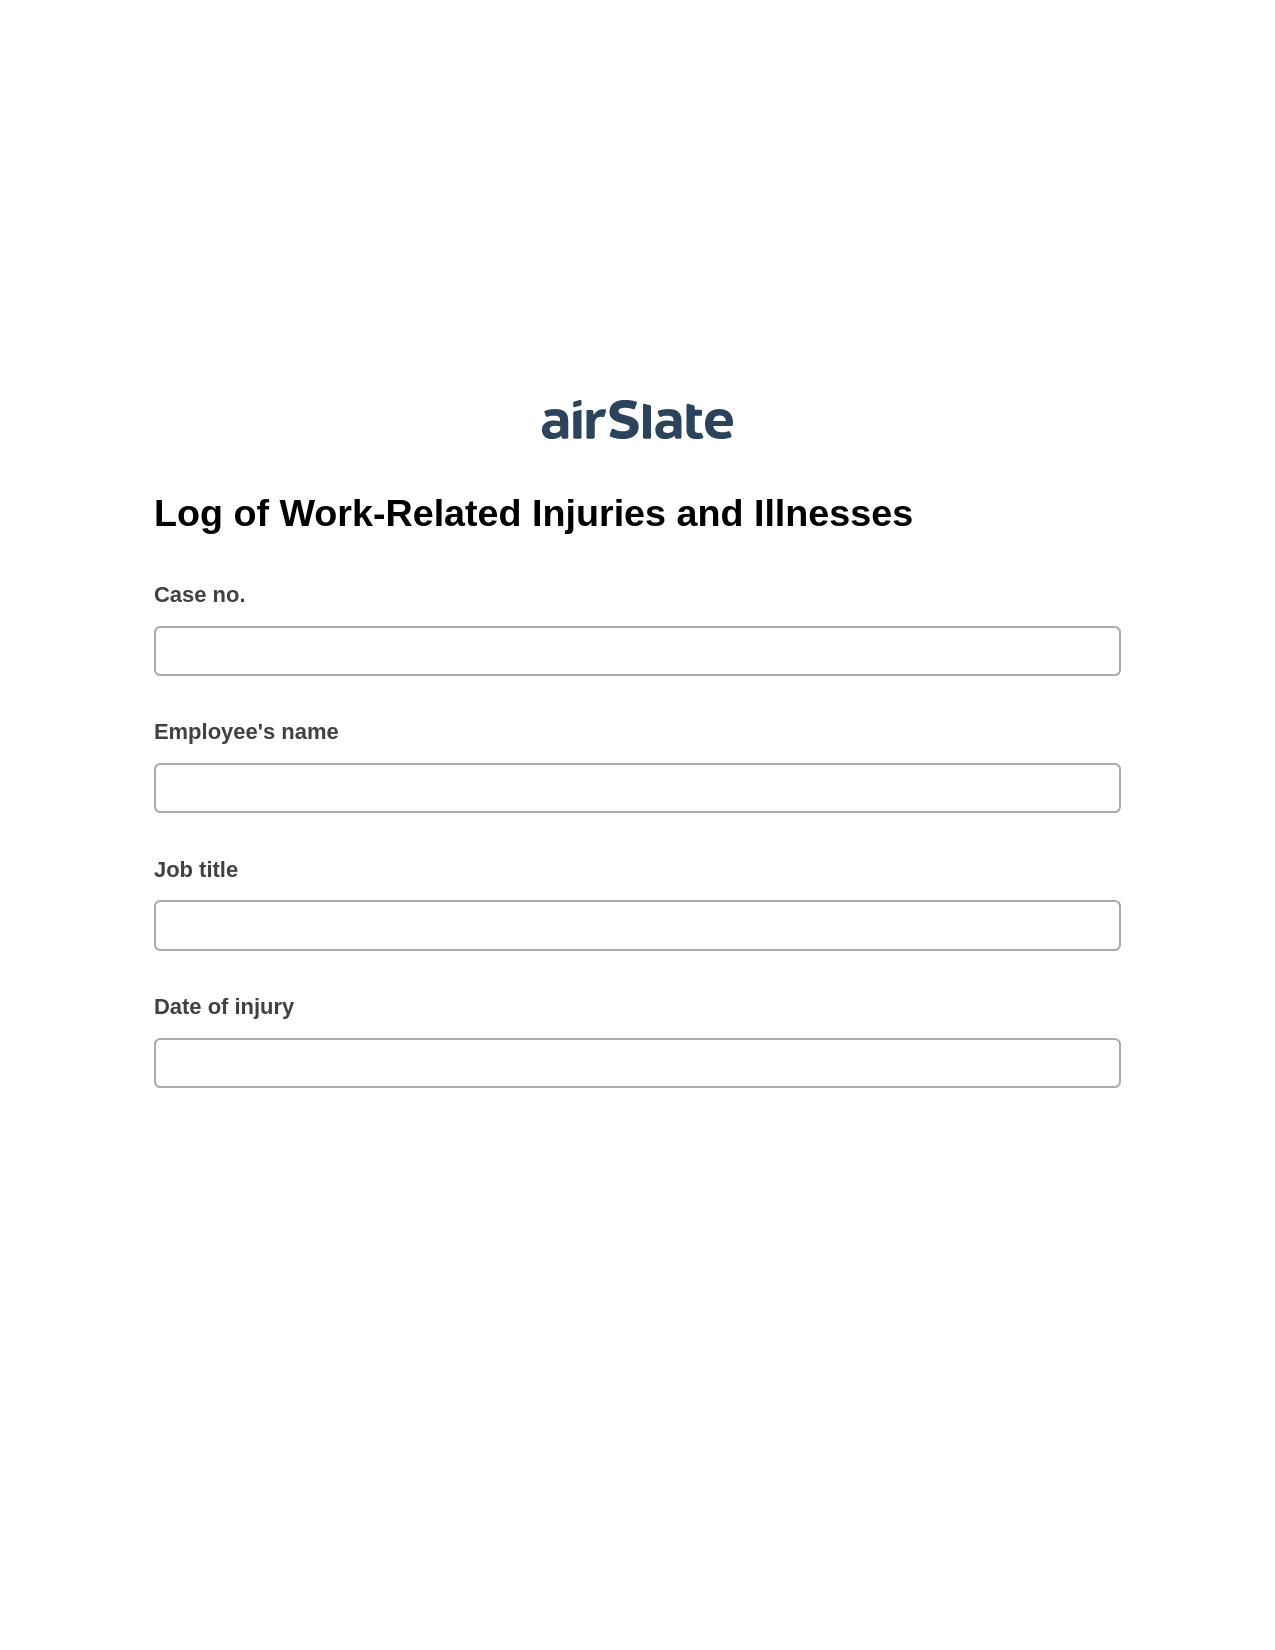 Log of Work-Related Injuries and Illnesses Pre-fill from Salesforce Records with SOQL Bot, Reminder Bot, Dropbox Bot